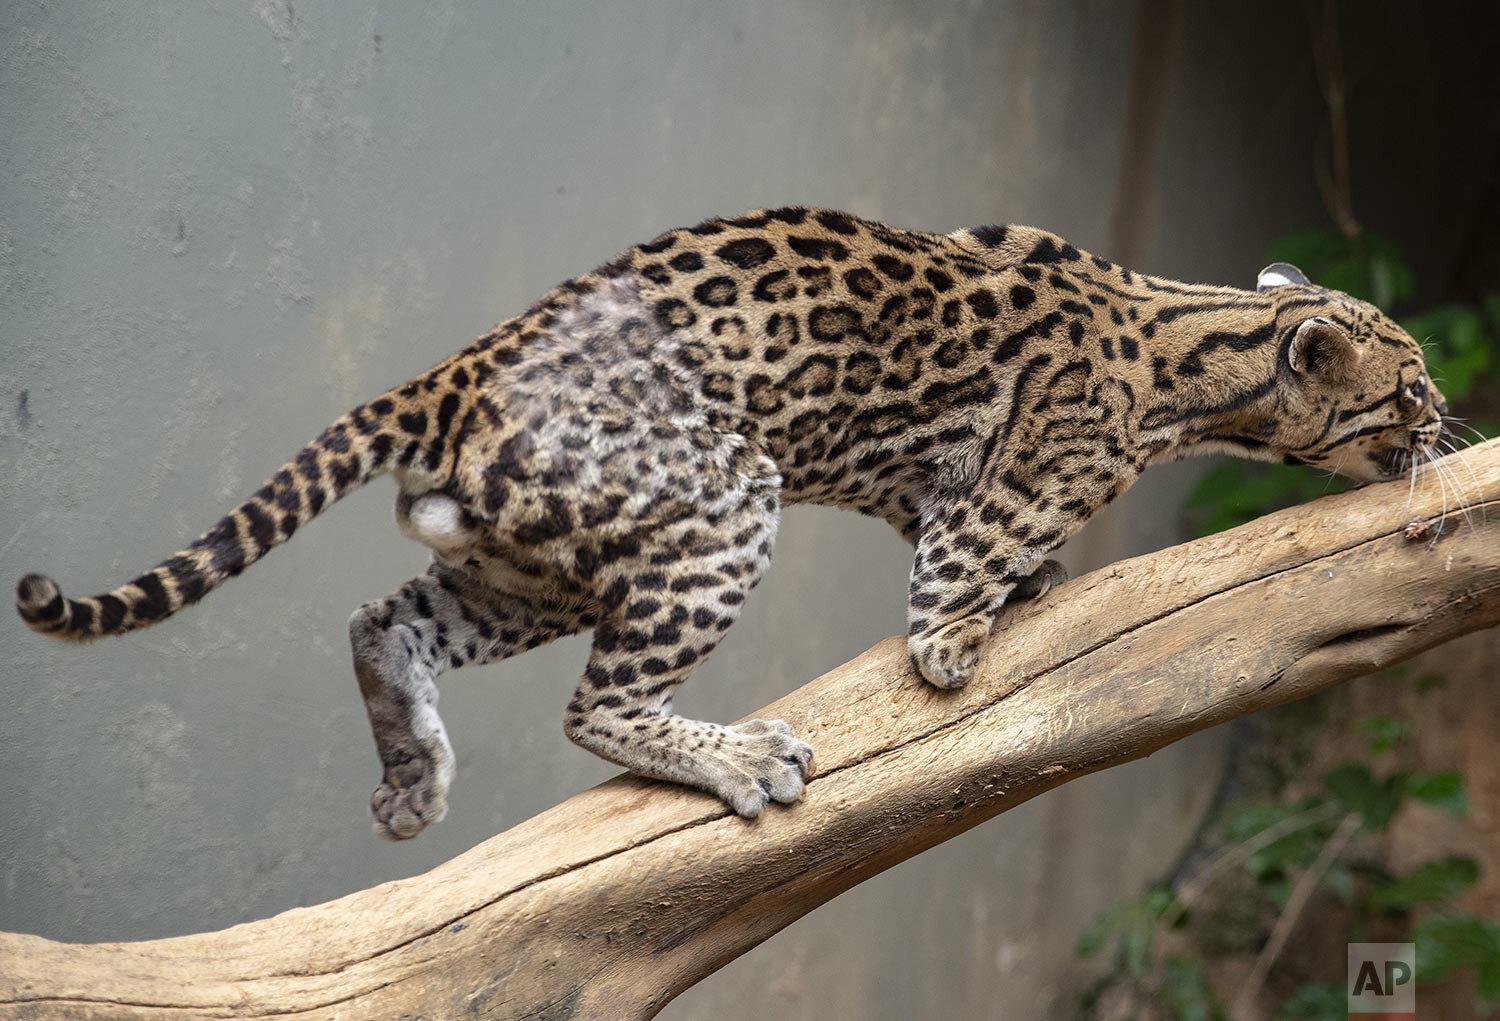  An injured ocelot that lost part of its leg when it was run over by a car climbs a branch inside its cage at the Mata Ciliar NGO in Jundiai, Brazil, Oct. 20, 2020. (AP Photo/Andre Penner) 